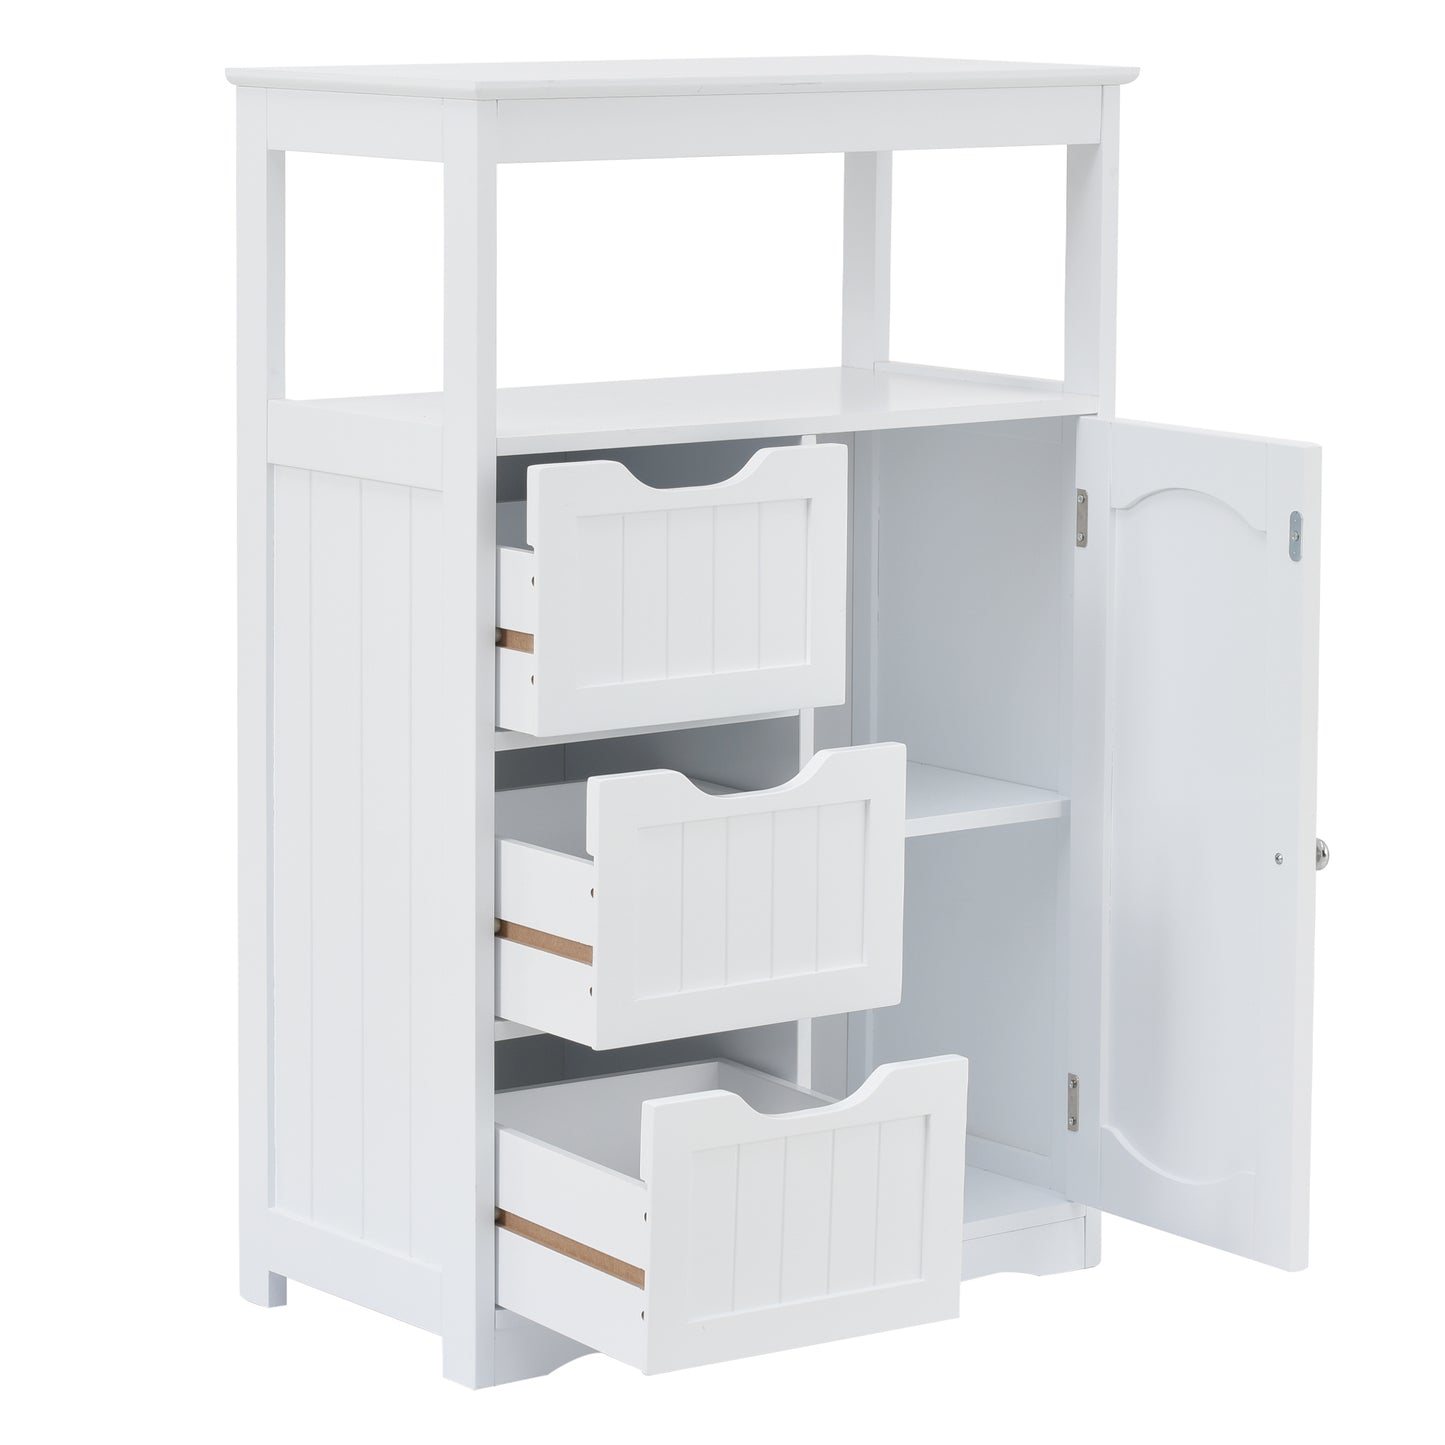 White Bathroom Cabinet, Freestanding Multi-Functional Storage Cabinet with Door and 3 Drawers, MDF Board with Painted Finish